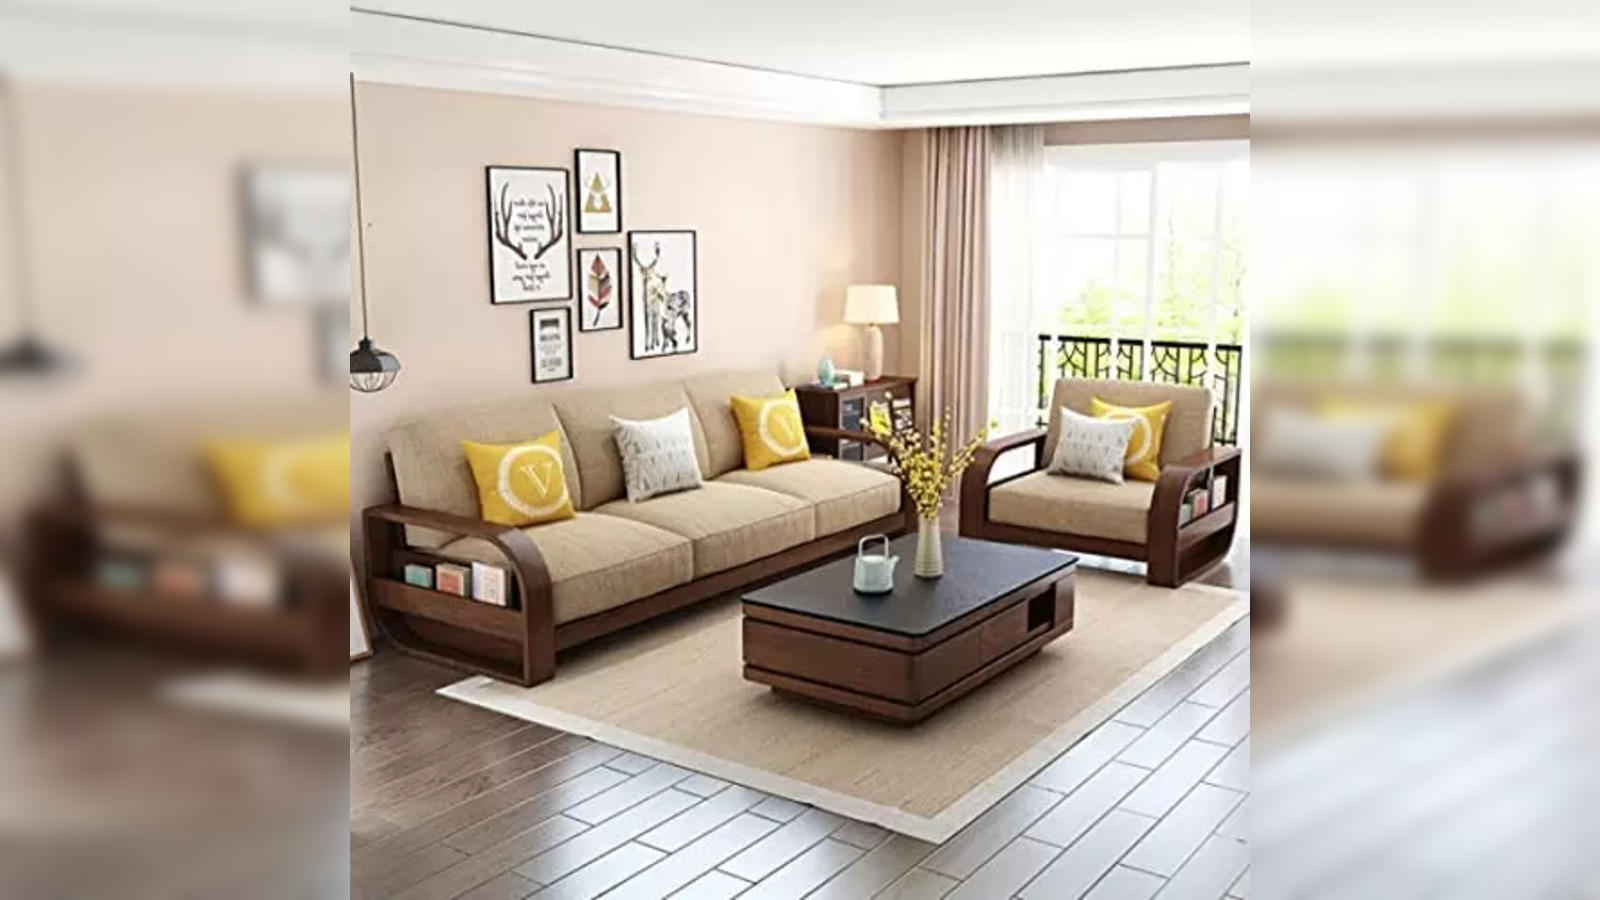 Homes With The Best Wooden Sofa Set